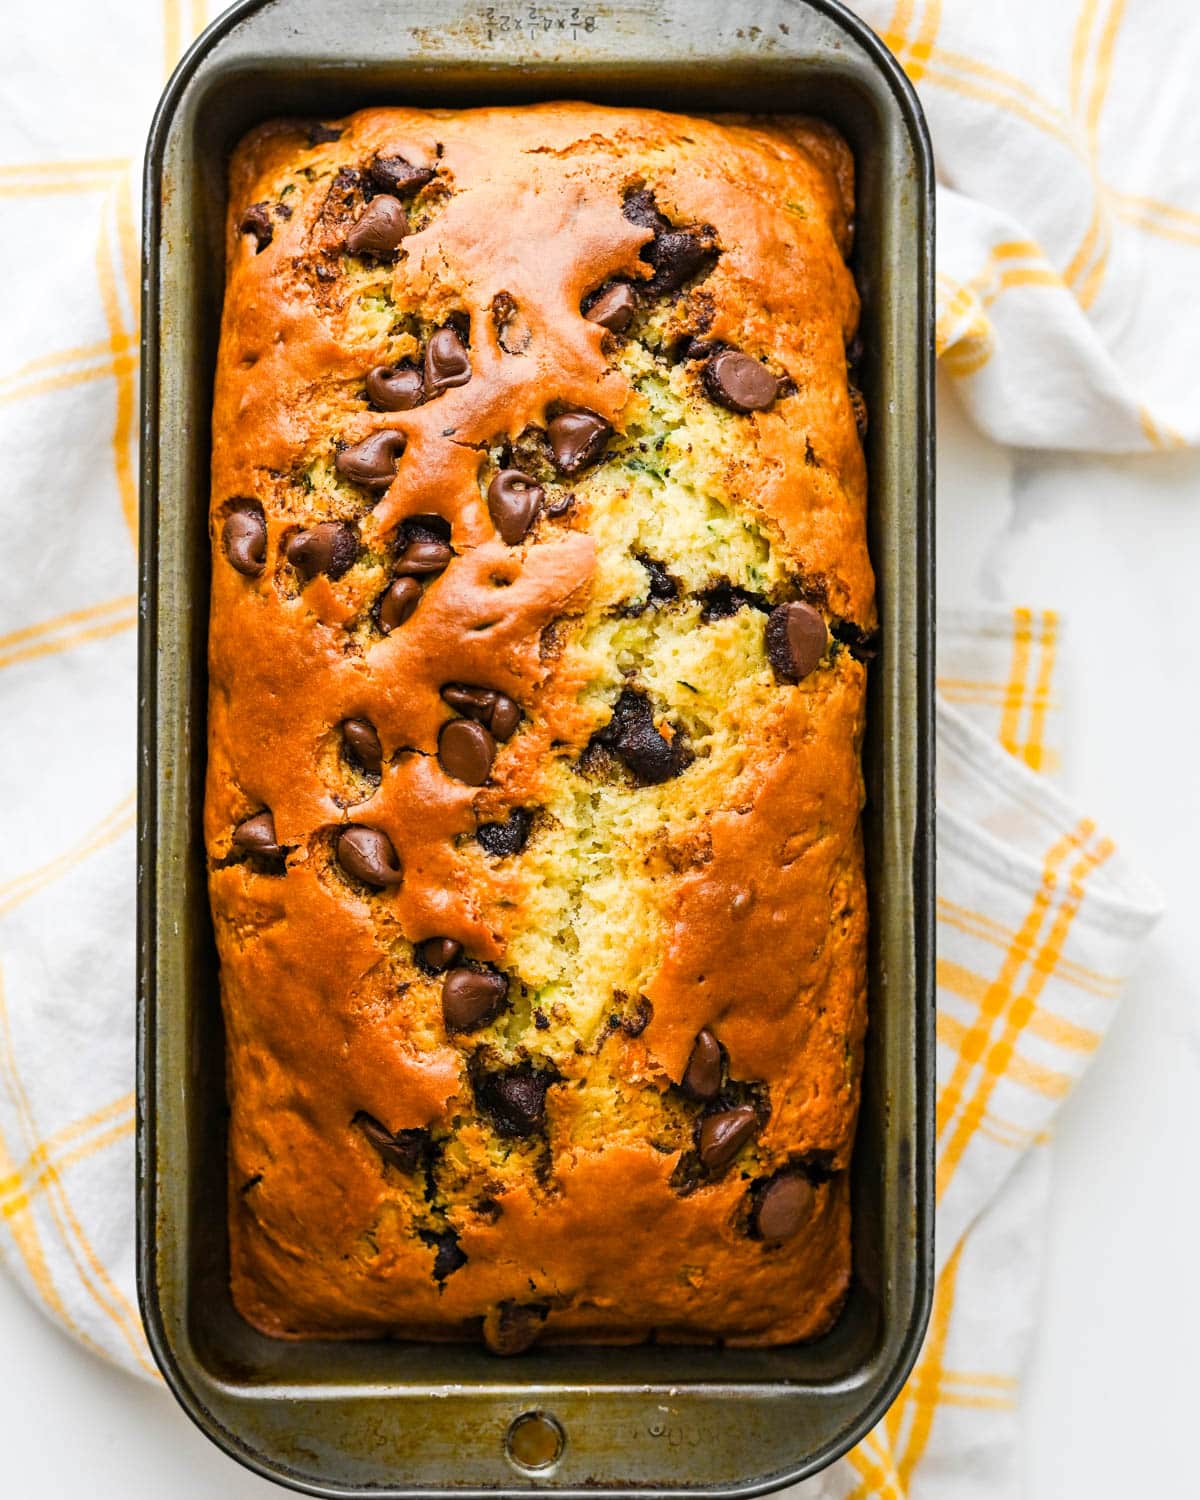 A baked loaf of the chocolate chip zucchini bread.